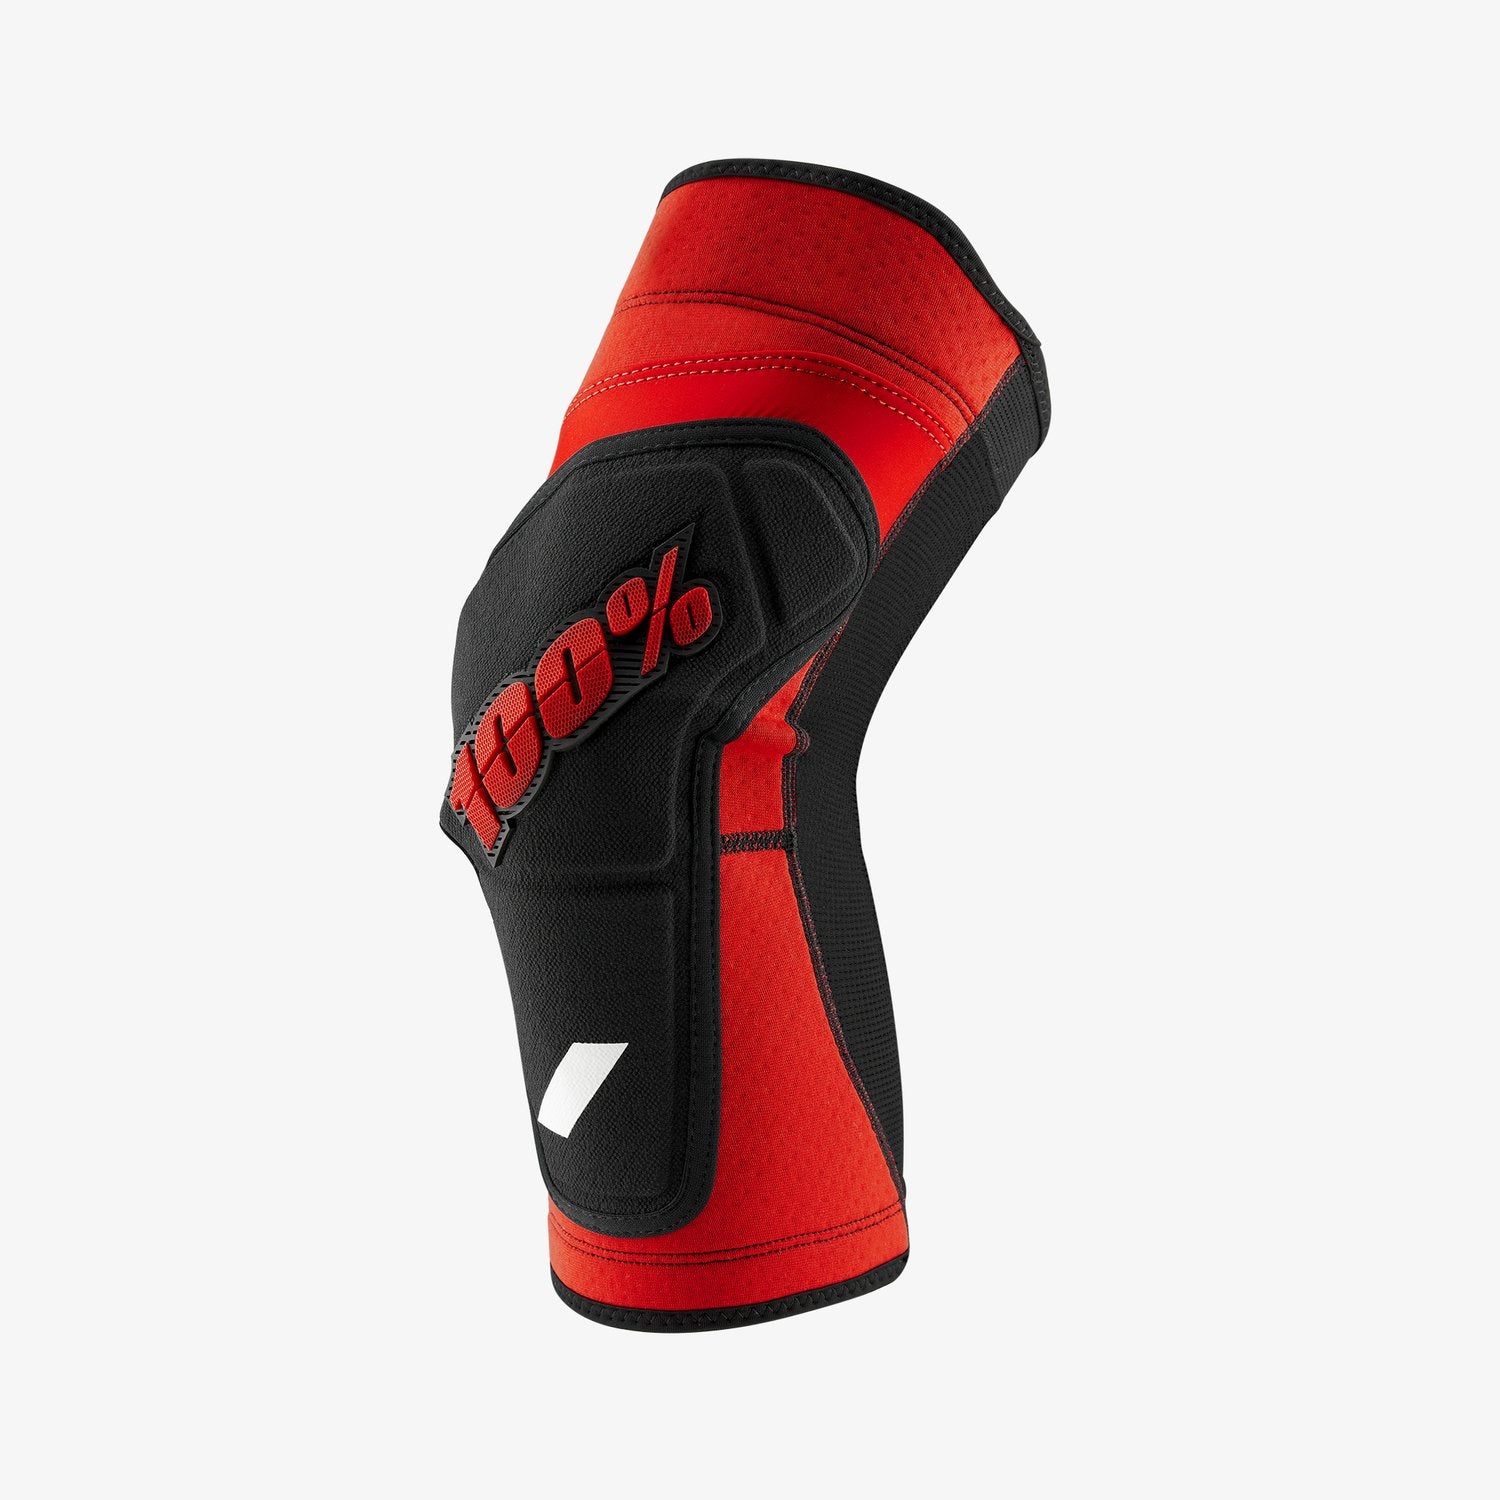 Ride 100% RIDECAMP Knee Guards/Pads, Color: Red/Black- Size MD